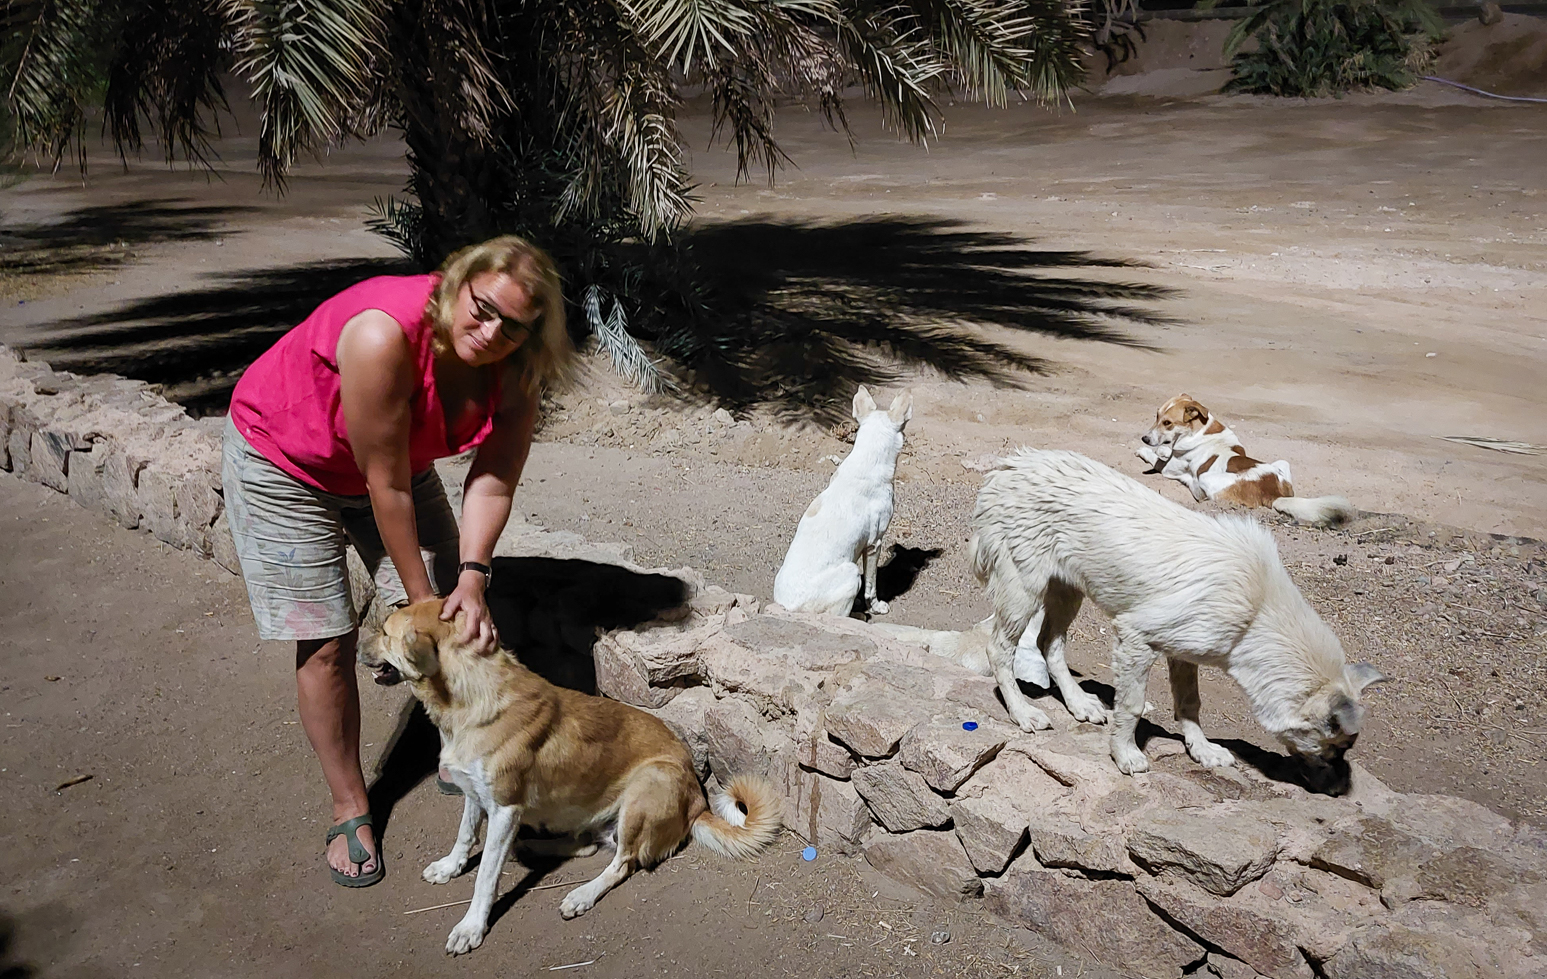 <span  class="uc_style_uc_tiles_grid_image_elementor_uc_items_attribute_title" style="color:#ffffff;">A positive difference to the rest of the Arabic world: in Jordan dogs are more welcome</span>